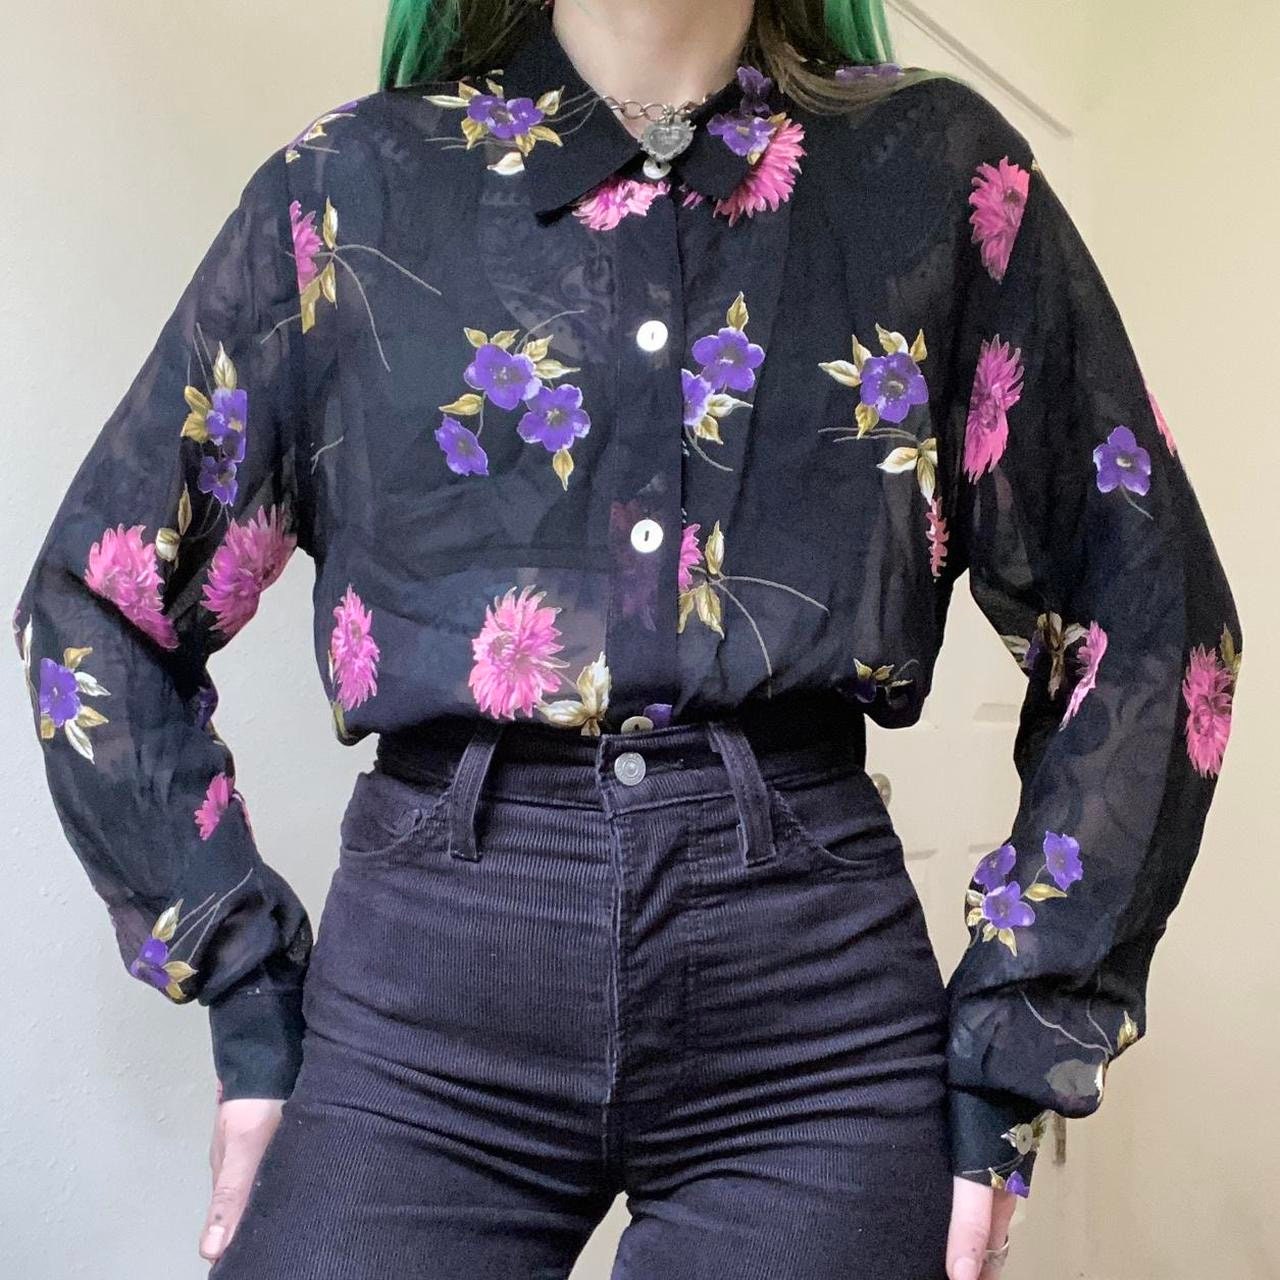 90s Vintage Sheer Floral Collared Blouse by Coldwater Creek - Etsy